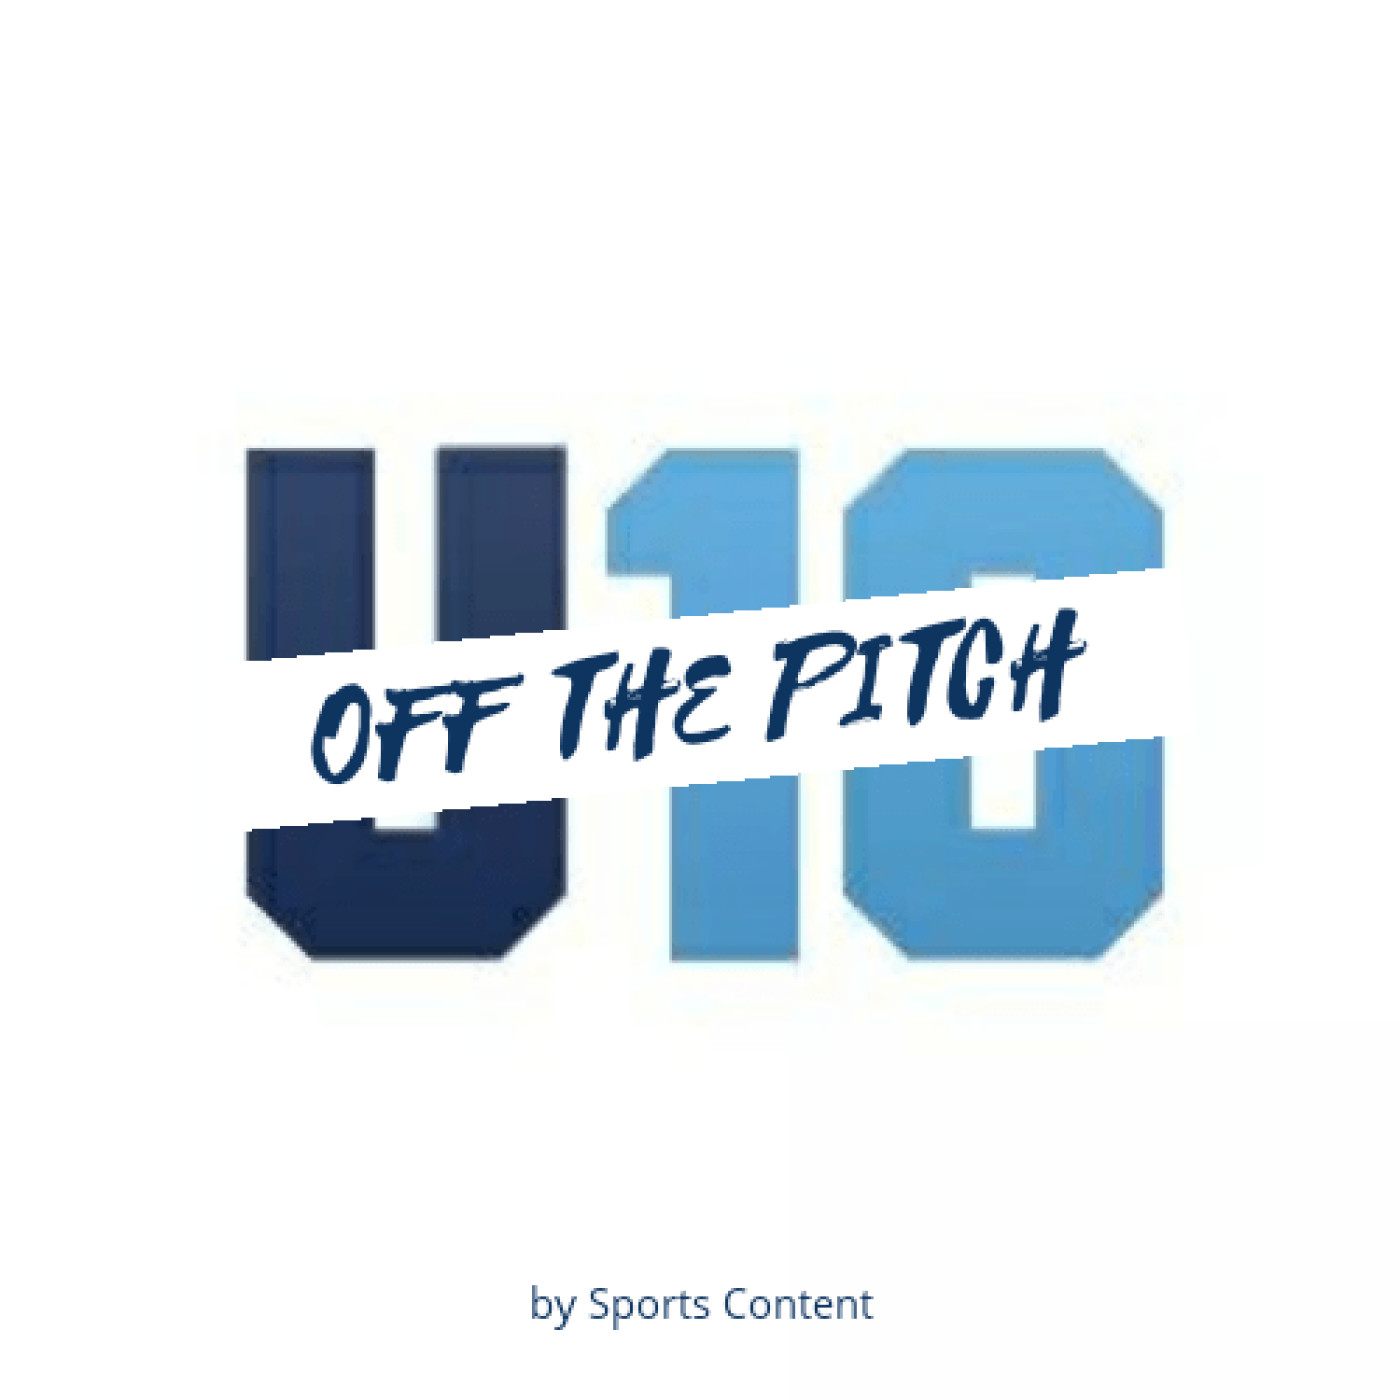 Off The Pitch - Promo